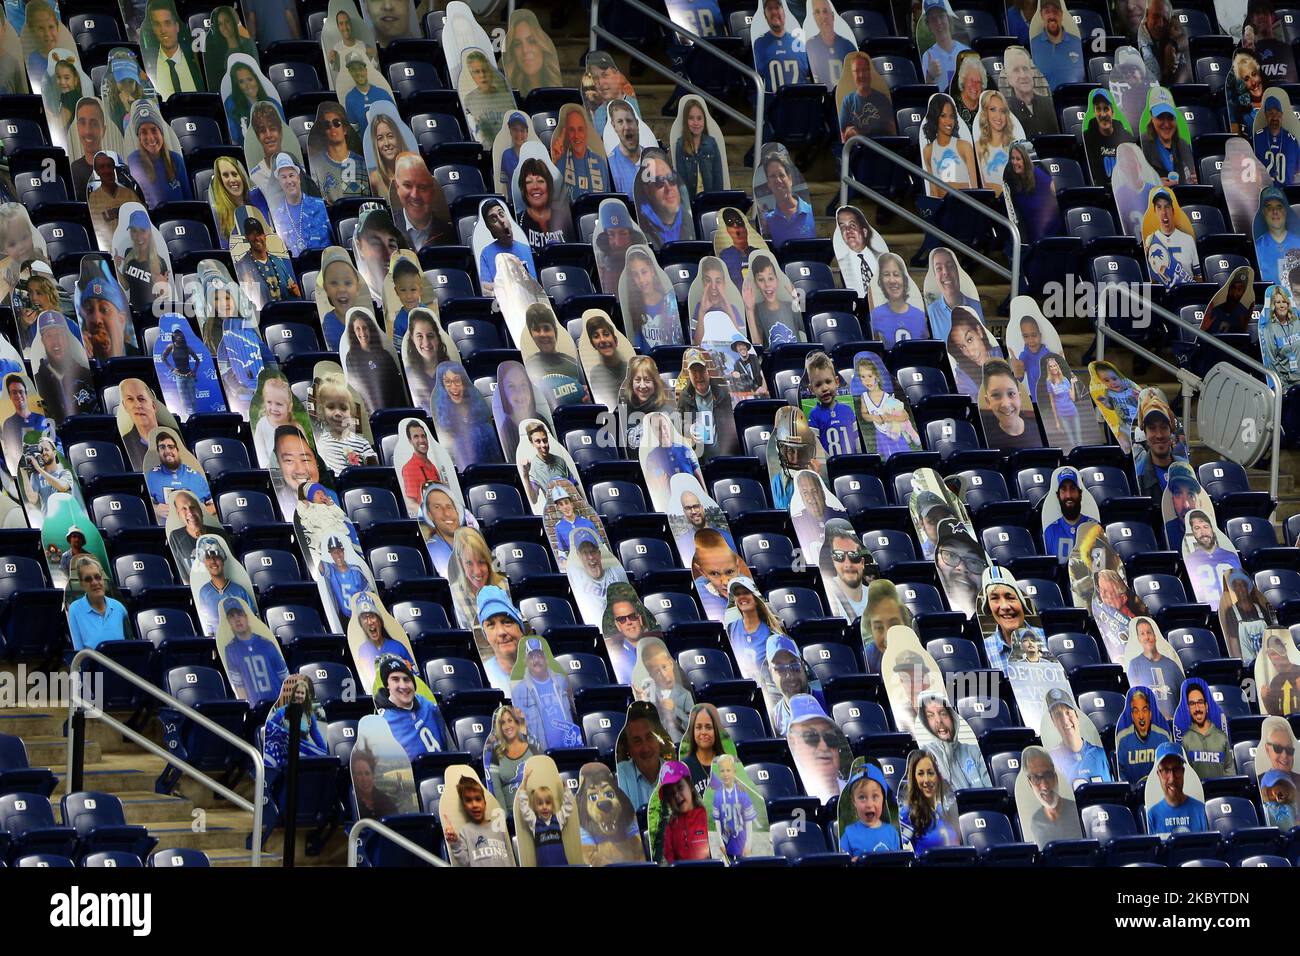 Cardboard cutouts are seen in the seats near the endzone in the absence of fans in attendance due to COVID-19 during the first half of an NFL football game against the Chicago Bears in Detroit, Michigan USA, on Sunday, September 13, 2020. (Photo by Amy Lemus/NurPhoto) Stock Photo